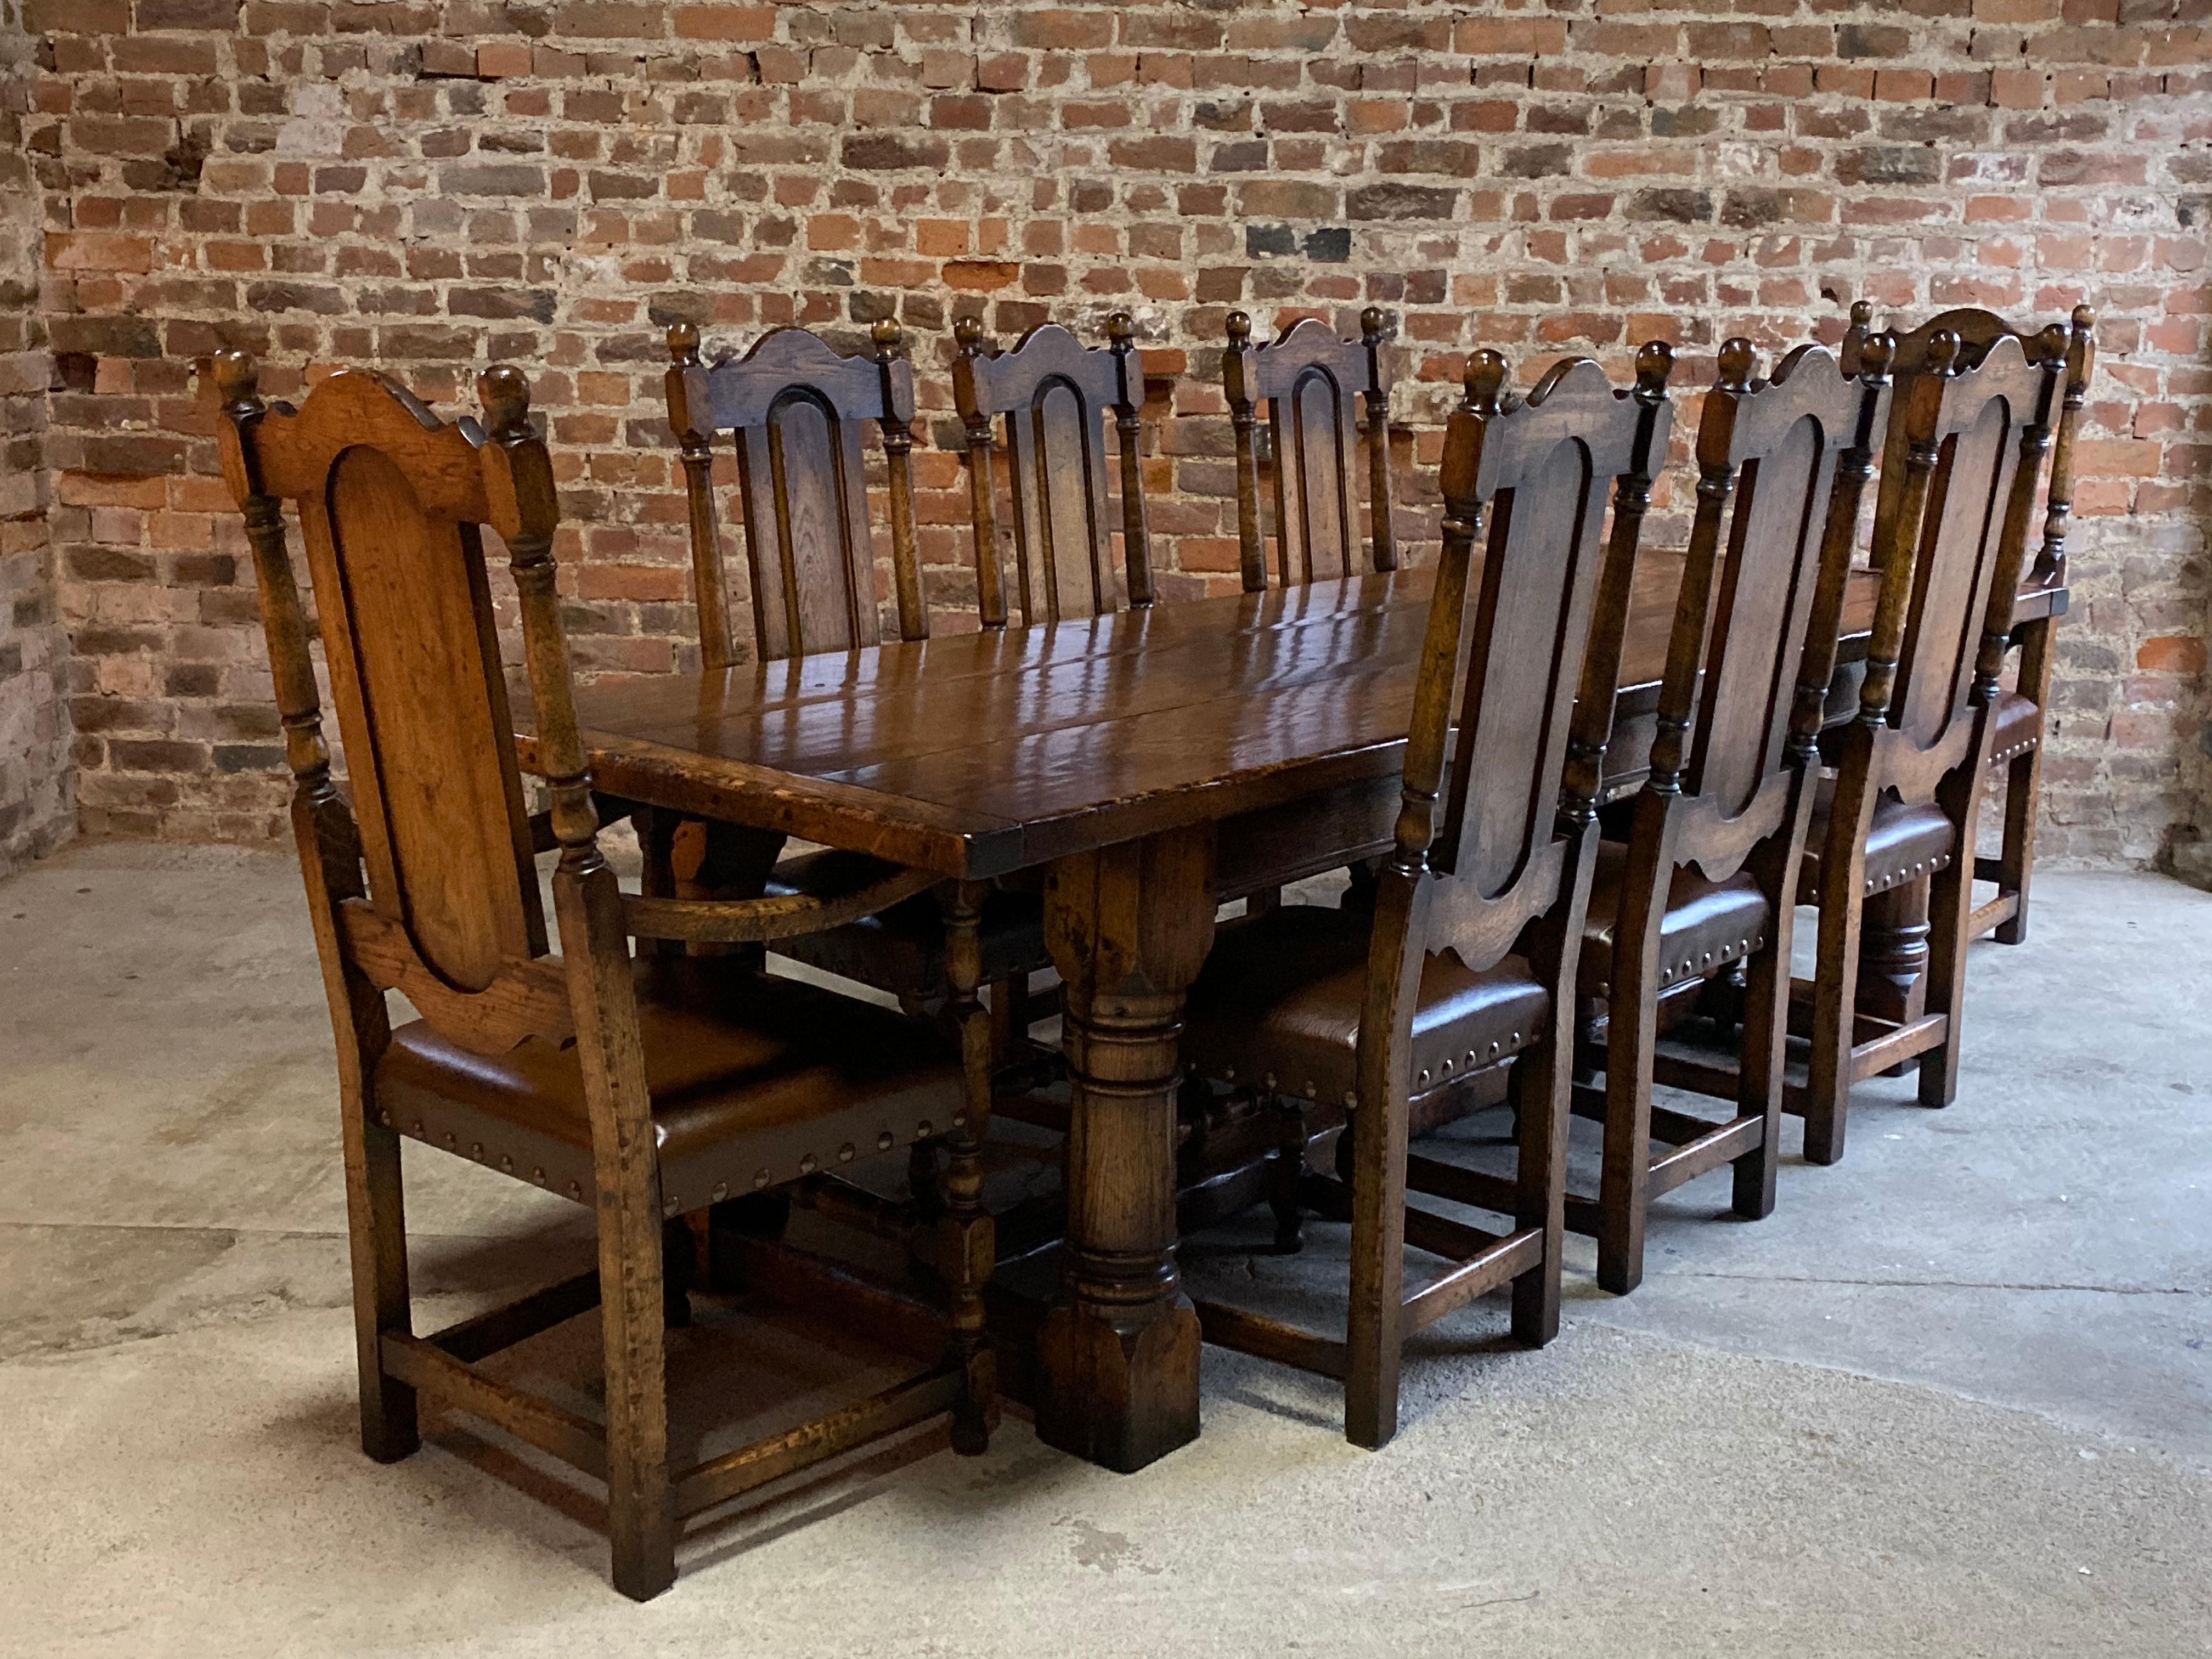 British Antique Oak Refectory Dining Table and Eight Chairs 19th Century, circa 1890